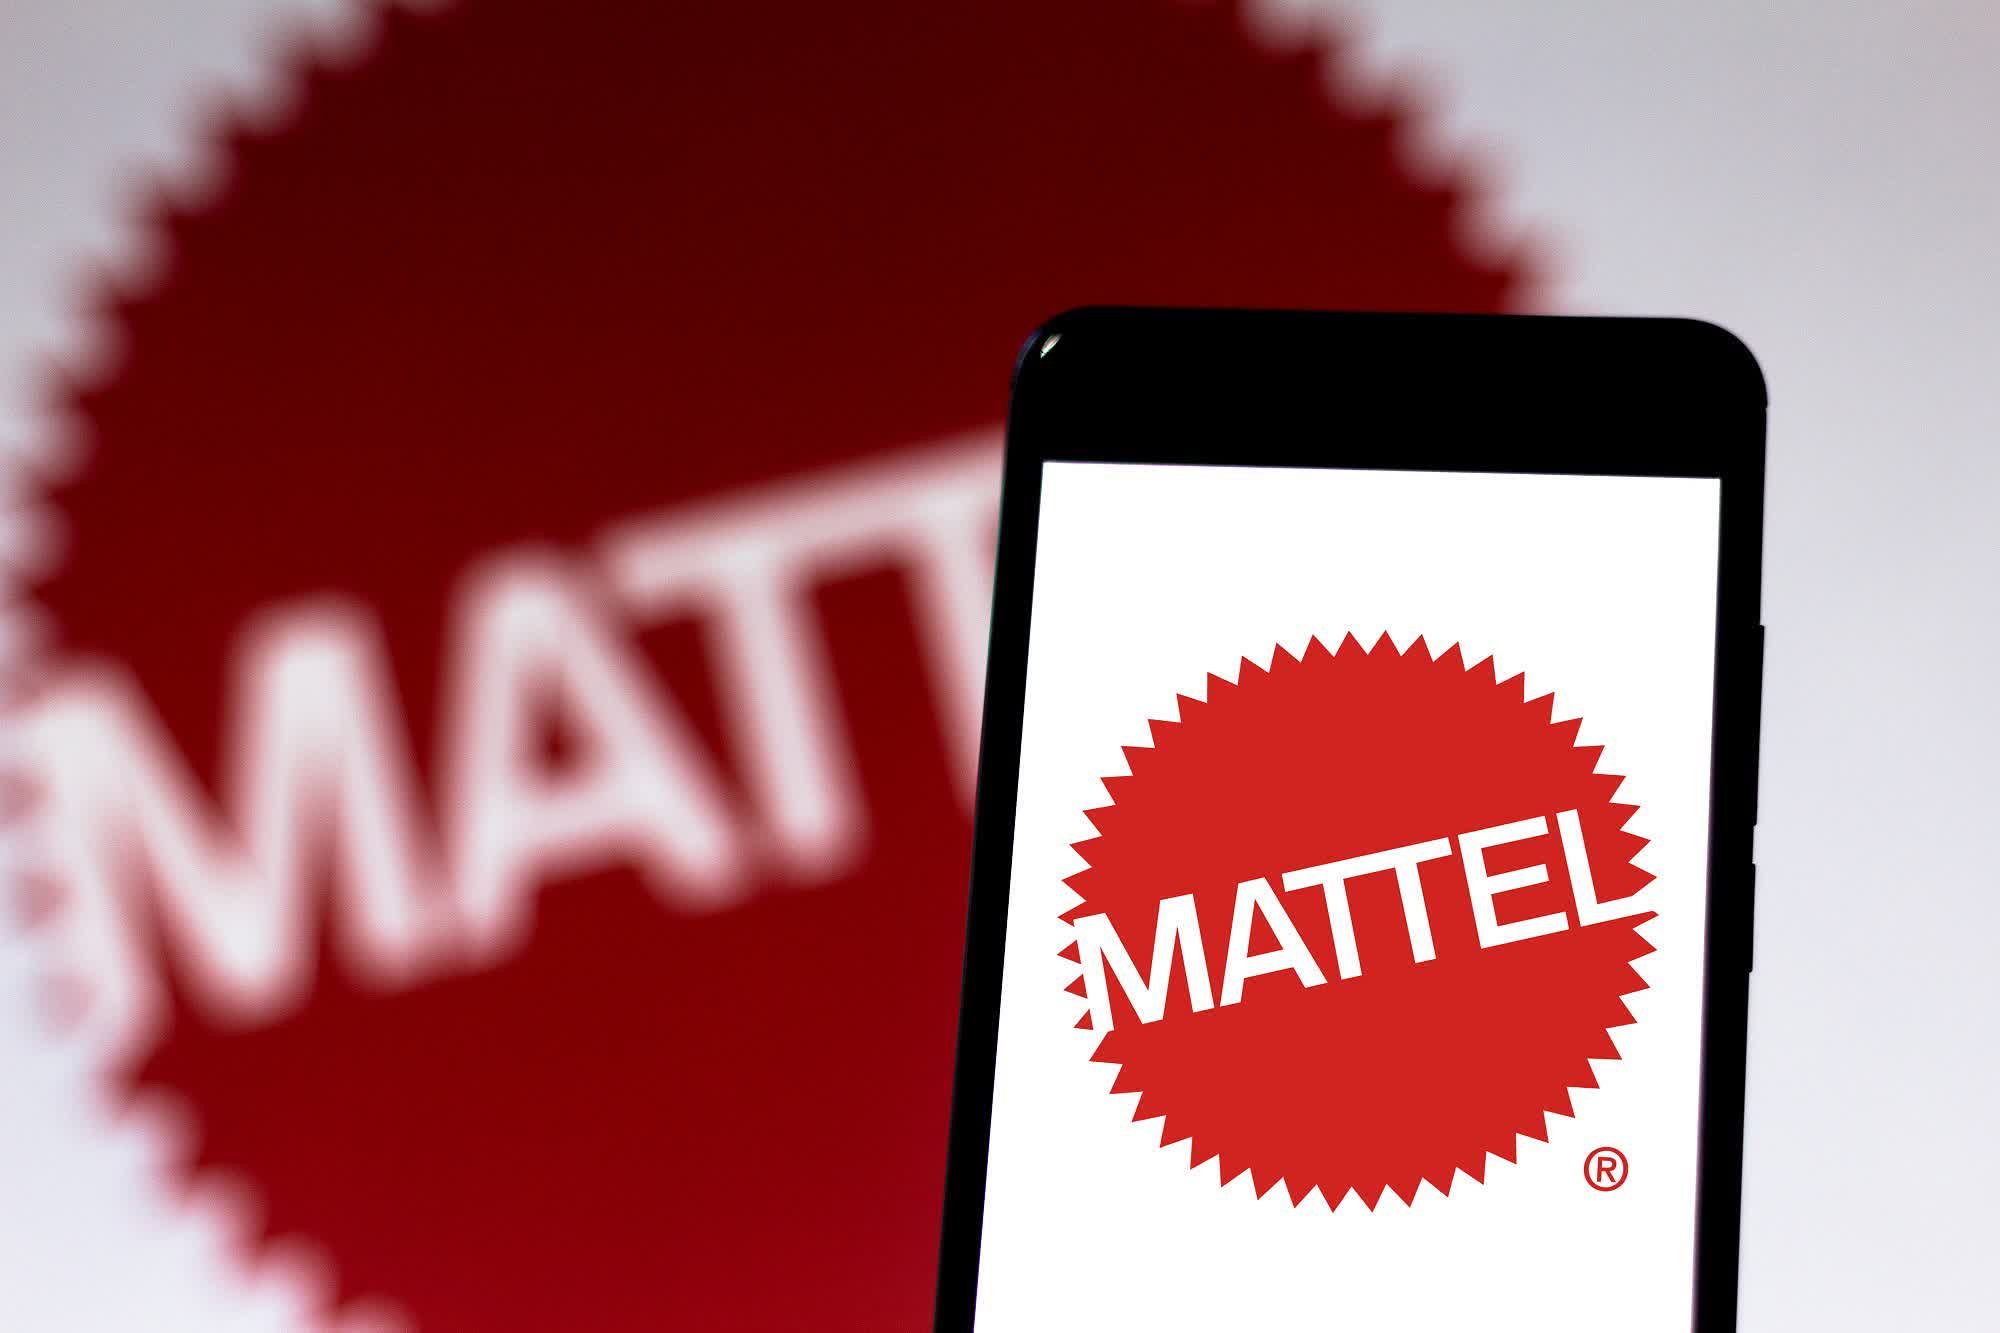 Mattel reveals it was hit with ransomware attack